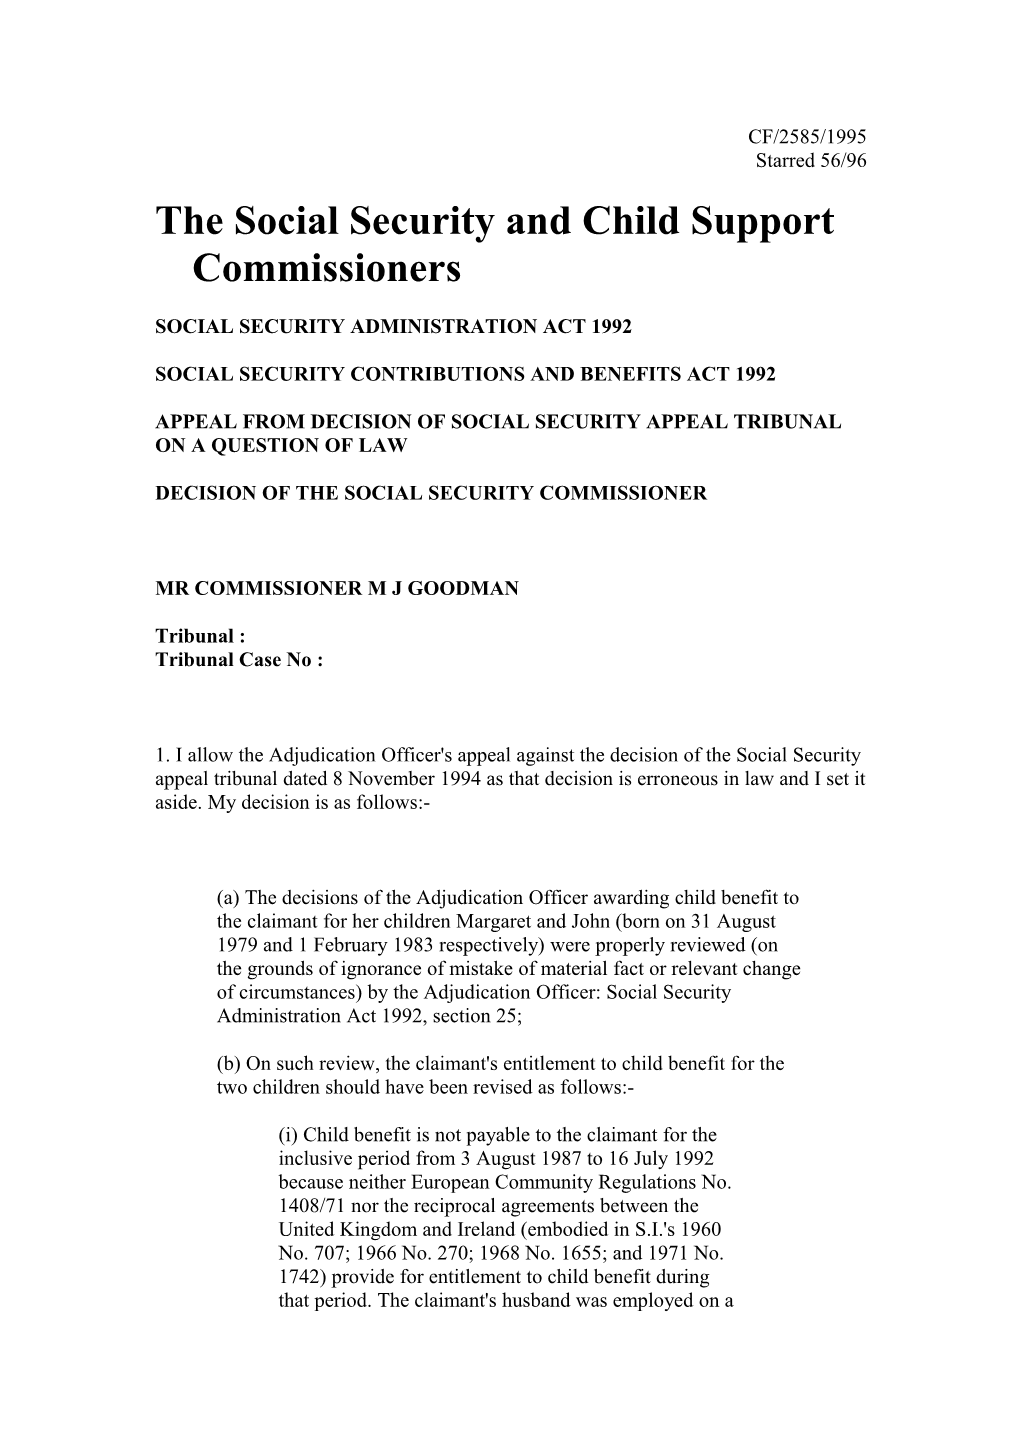 The Social Security and Child Support Commissioners s3